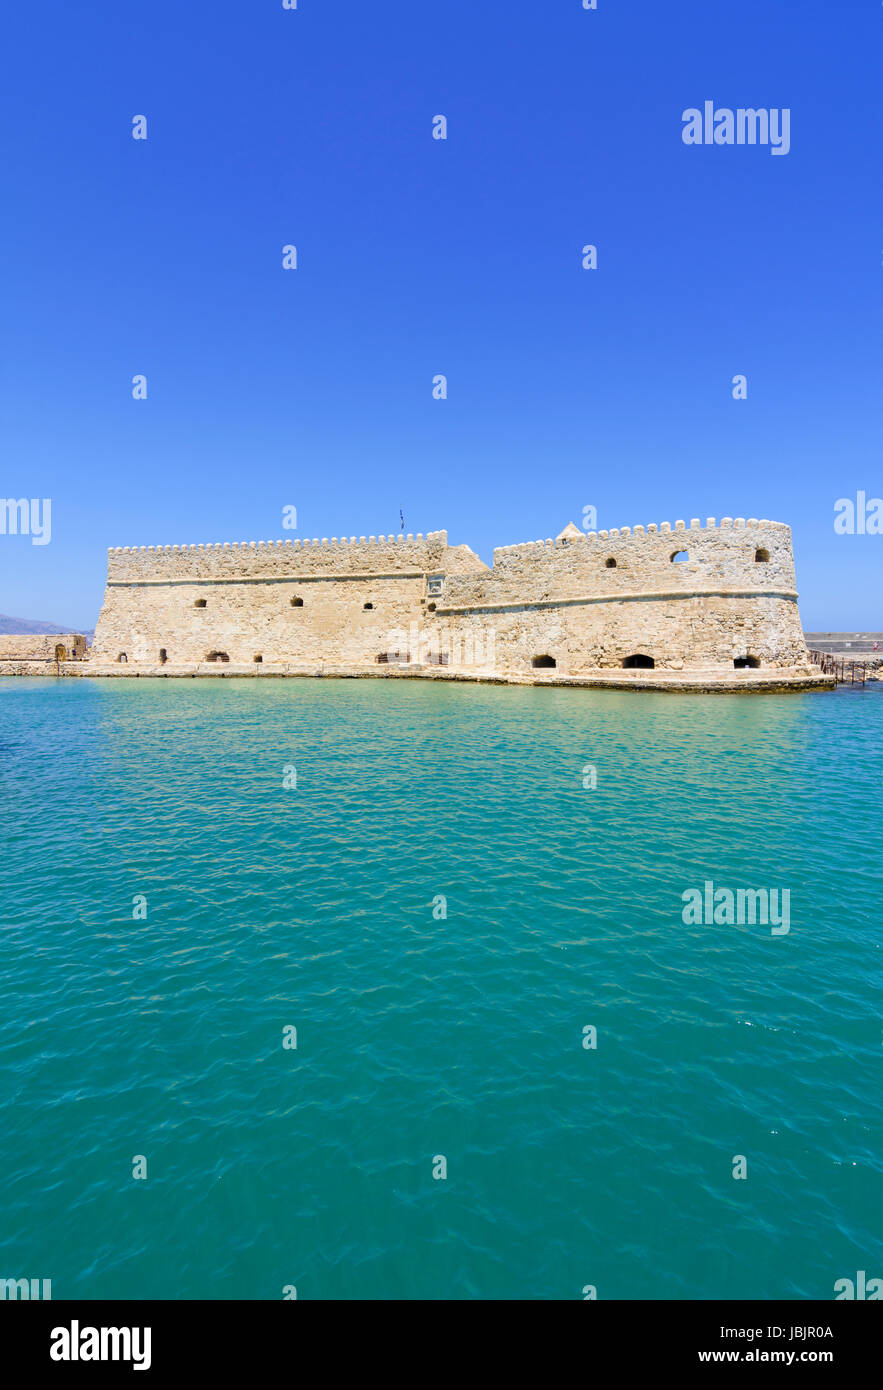 The Venetian Castle of Iraklion known as the Koules Fortress, at the entrance to the old harbour of Heraklion, Crete, Greece Stock Photo